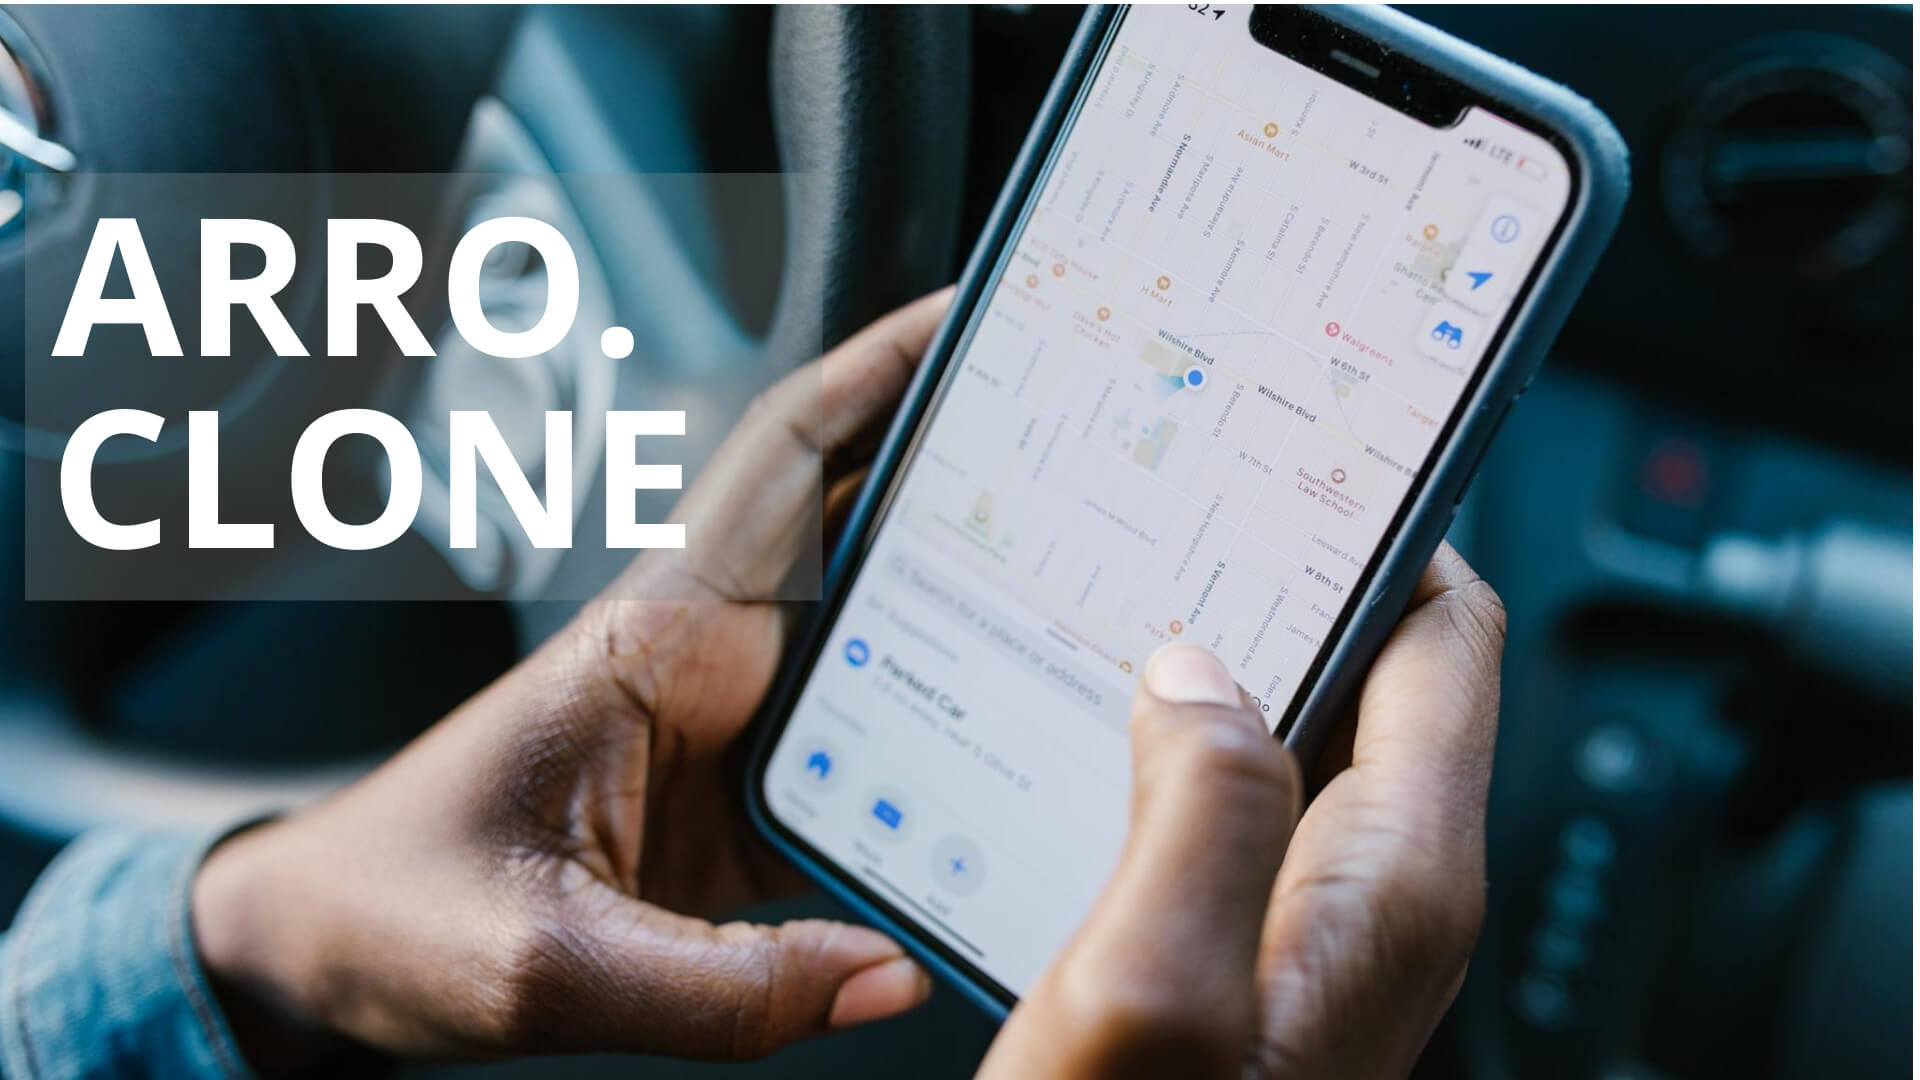 ARRO Clone: Let’s Start Your Taxi Business Like ARRO